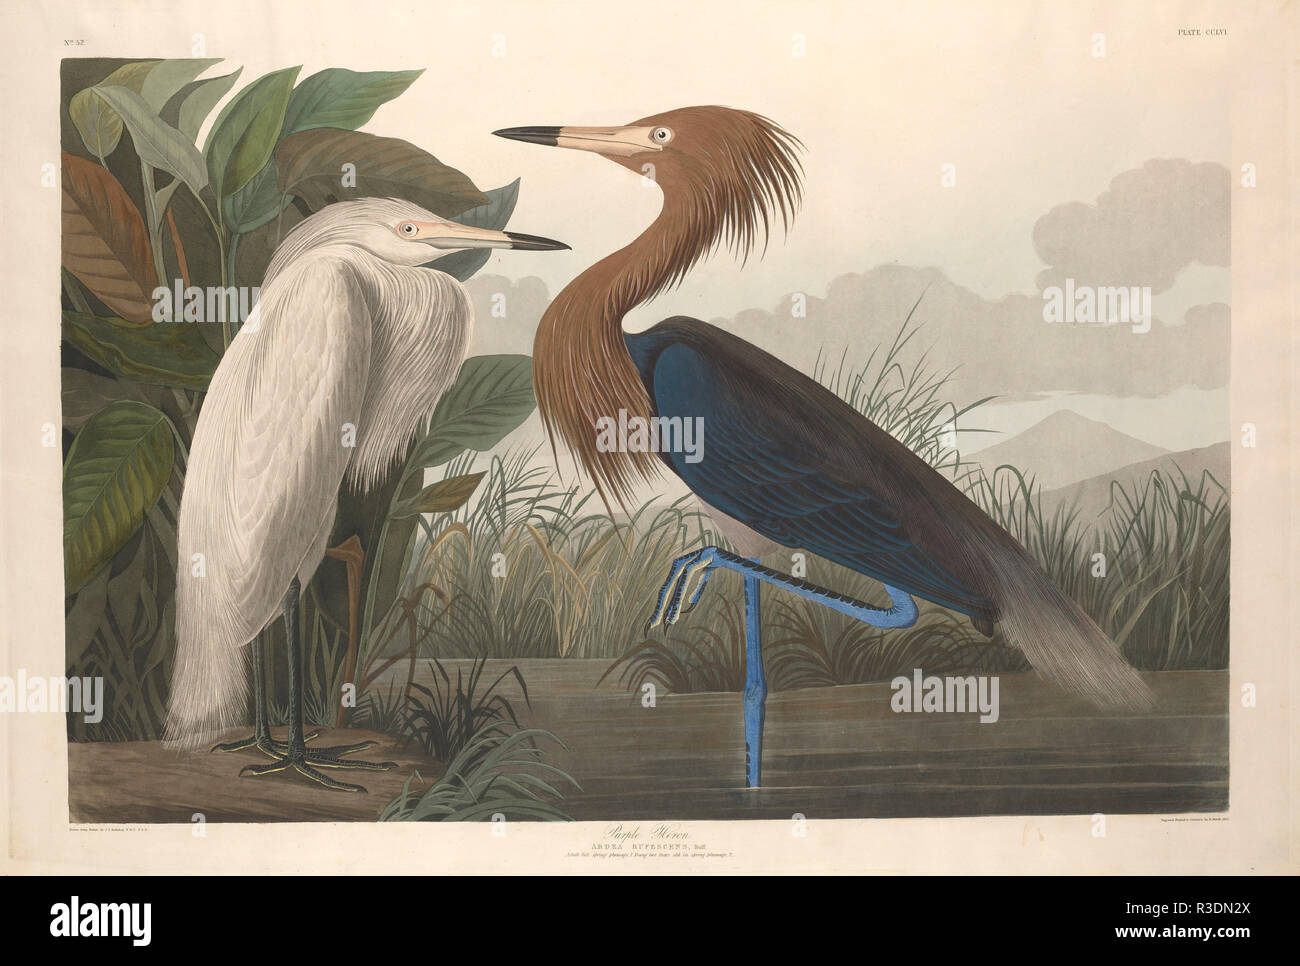 Purple Heron. Dated: 1835. Medium: hand-colored etching and aquatint on Whatman paper. Museum: National Gallery of Art, Washington DC. Author: Robert Havell after John James Audubon. Stock Photo